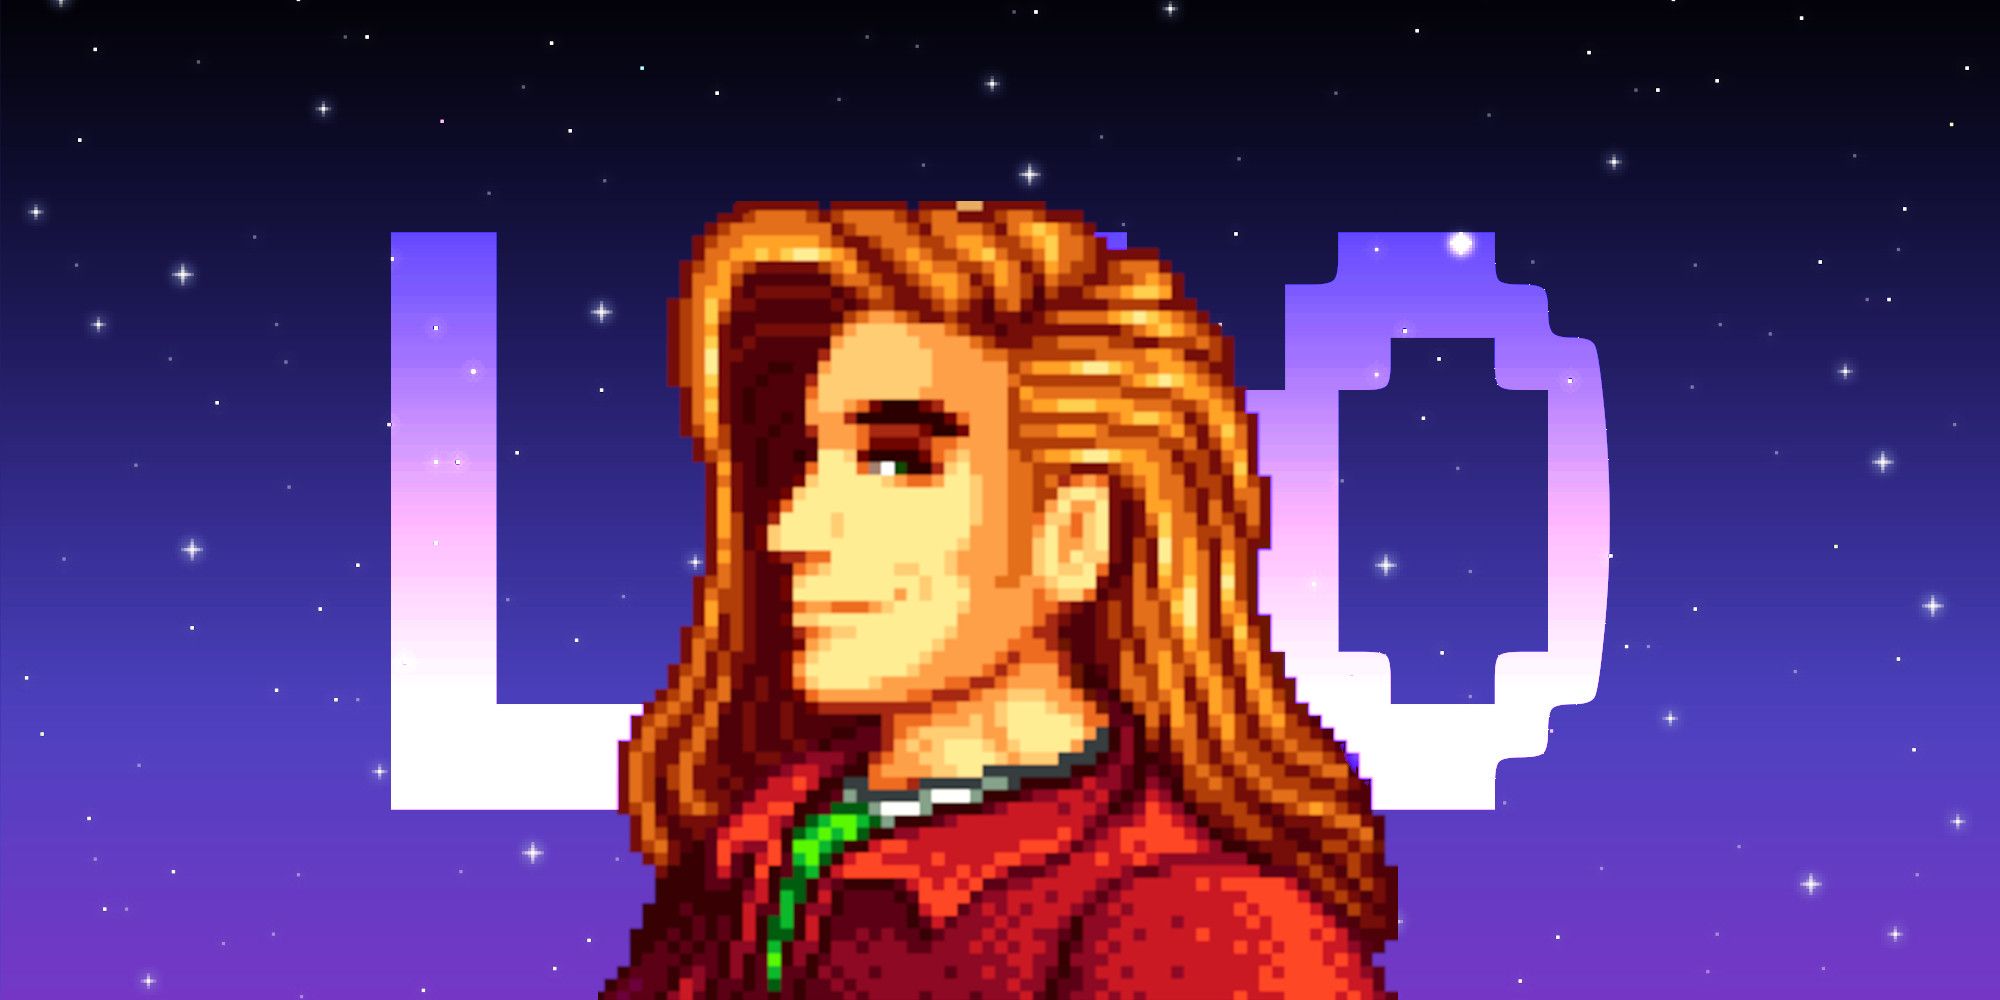 Elliot from Stardew Valley in front of a pixel star background and text reading %22Leo%22